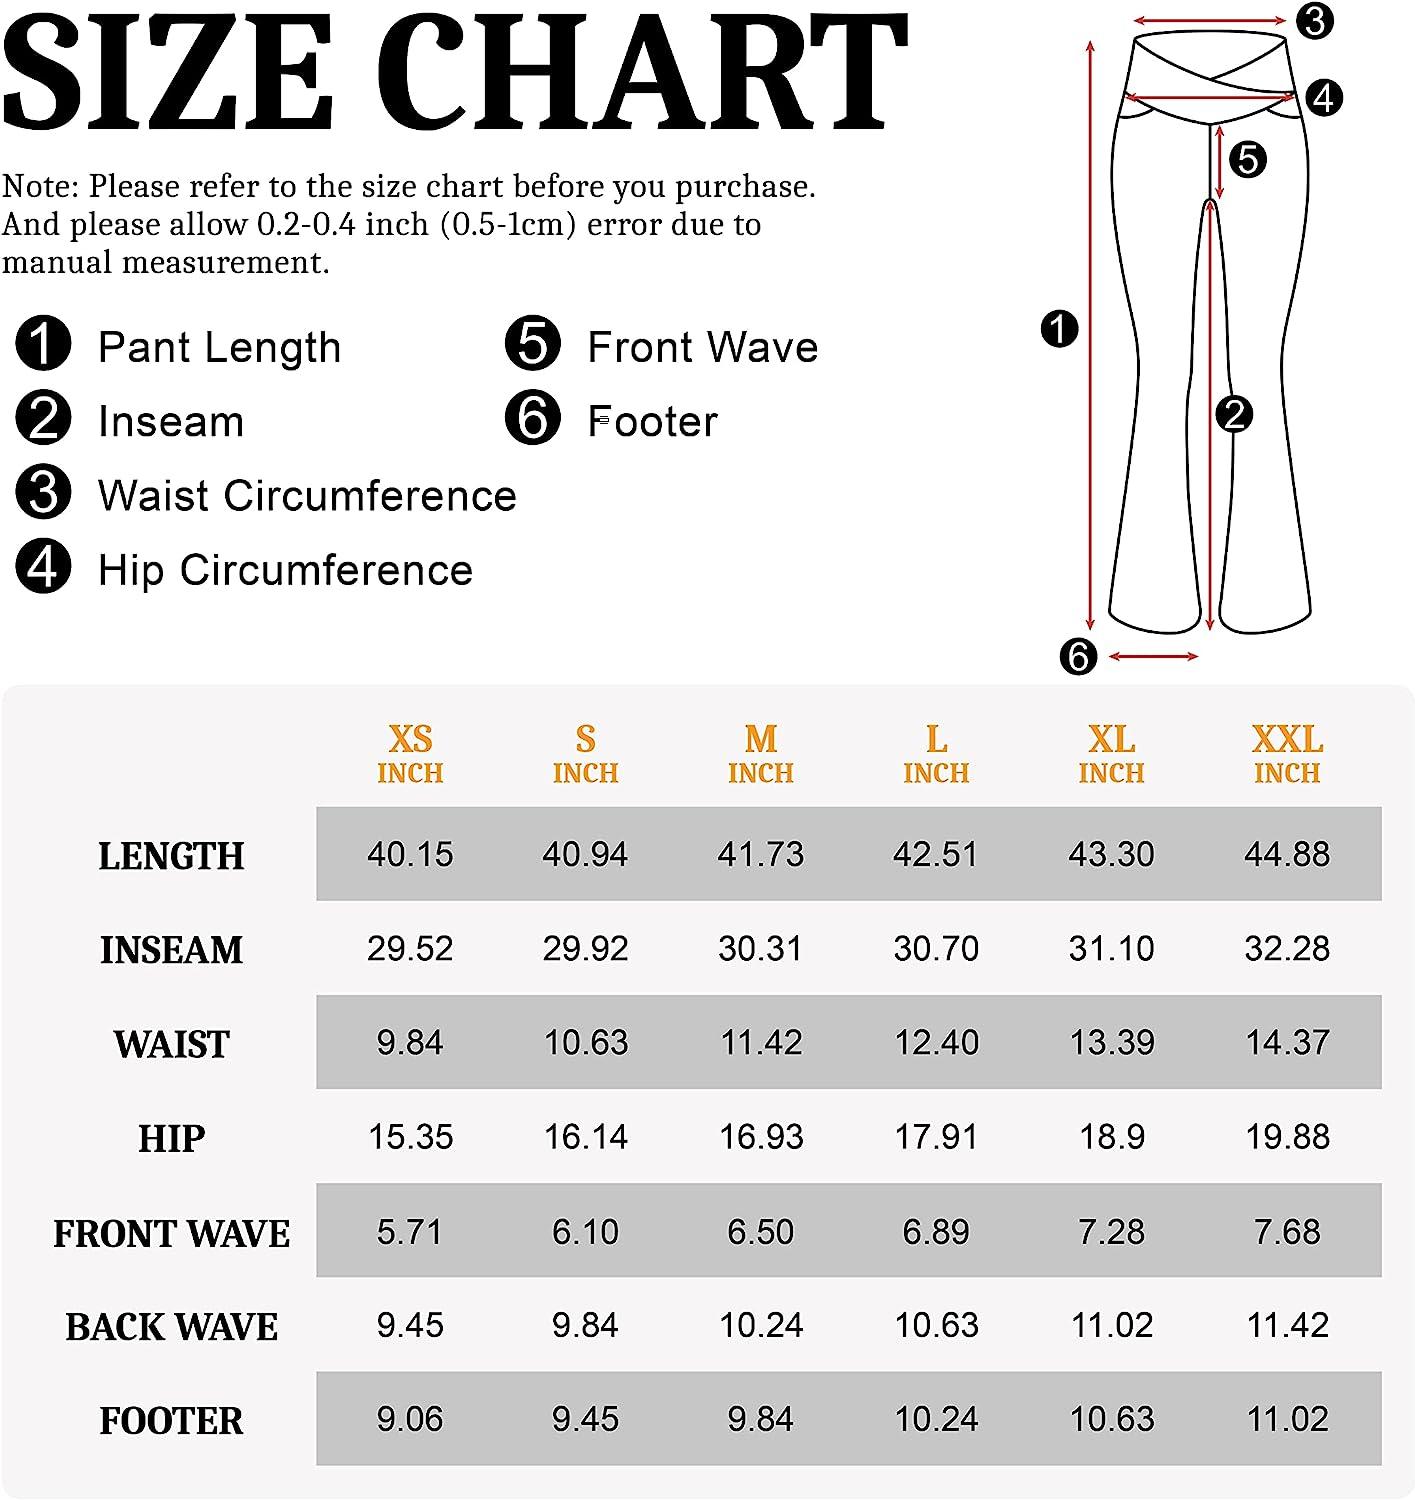 HEGALY Women's Flare Yoga Pants - Crossover Flare Leggings High